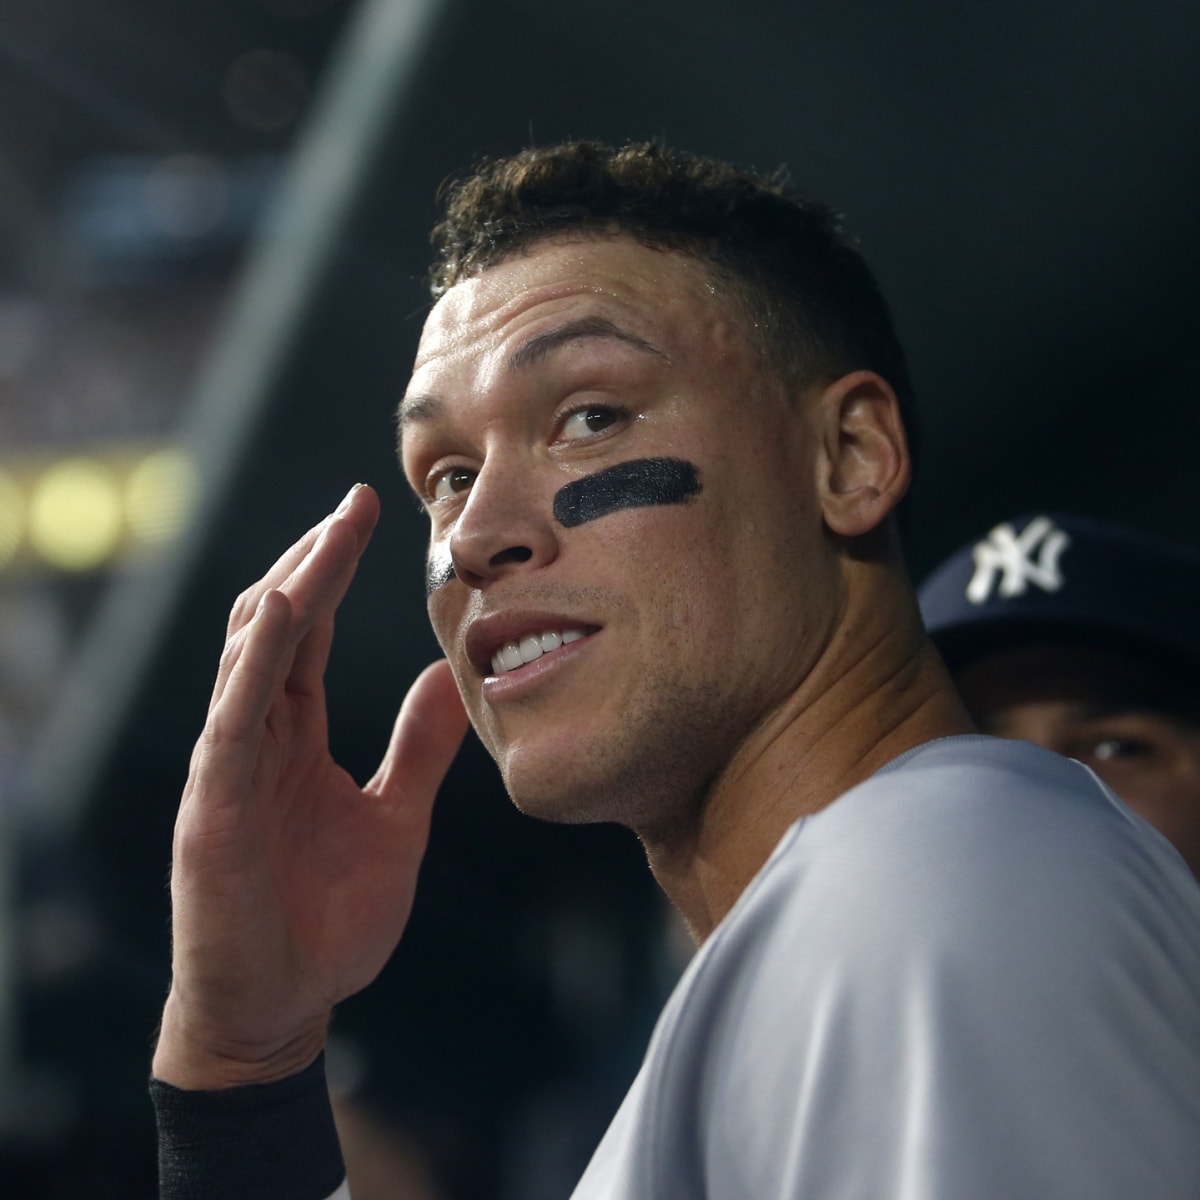 Fan who caught Aaron Judge's record-breaking home run unsure what